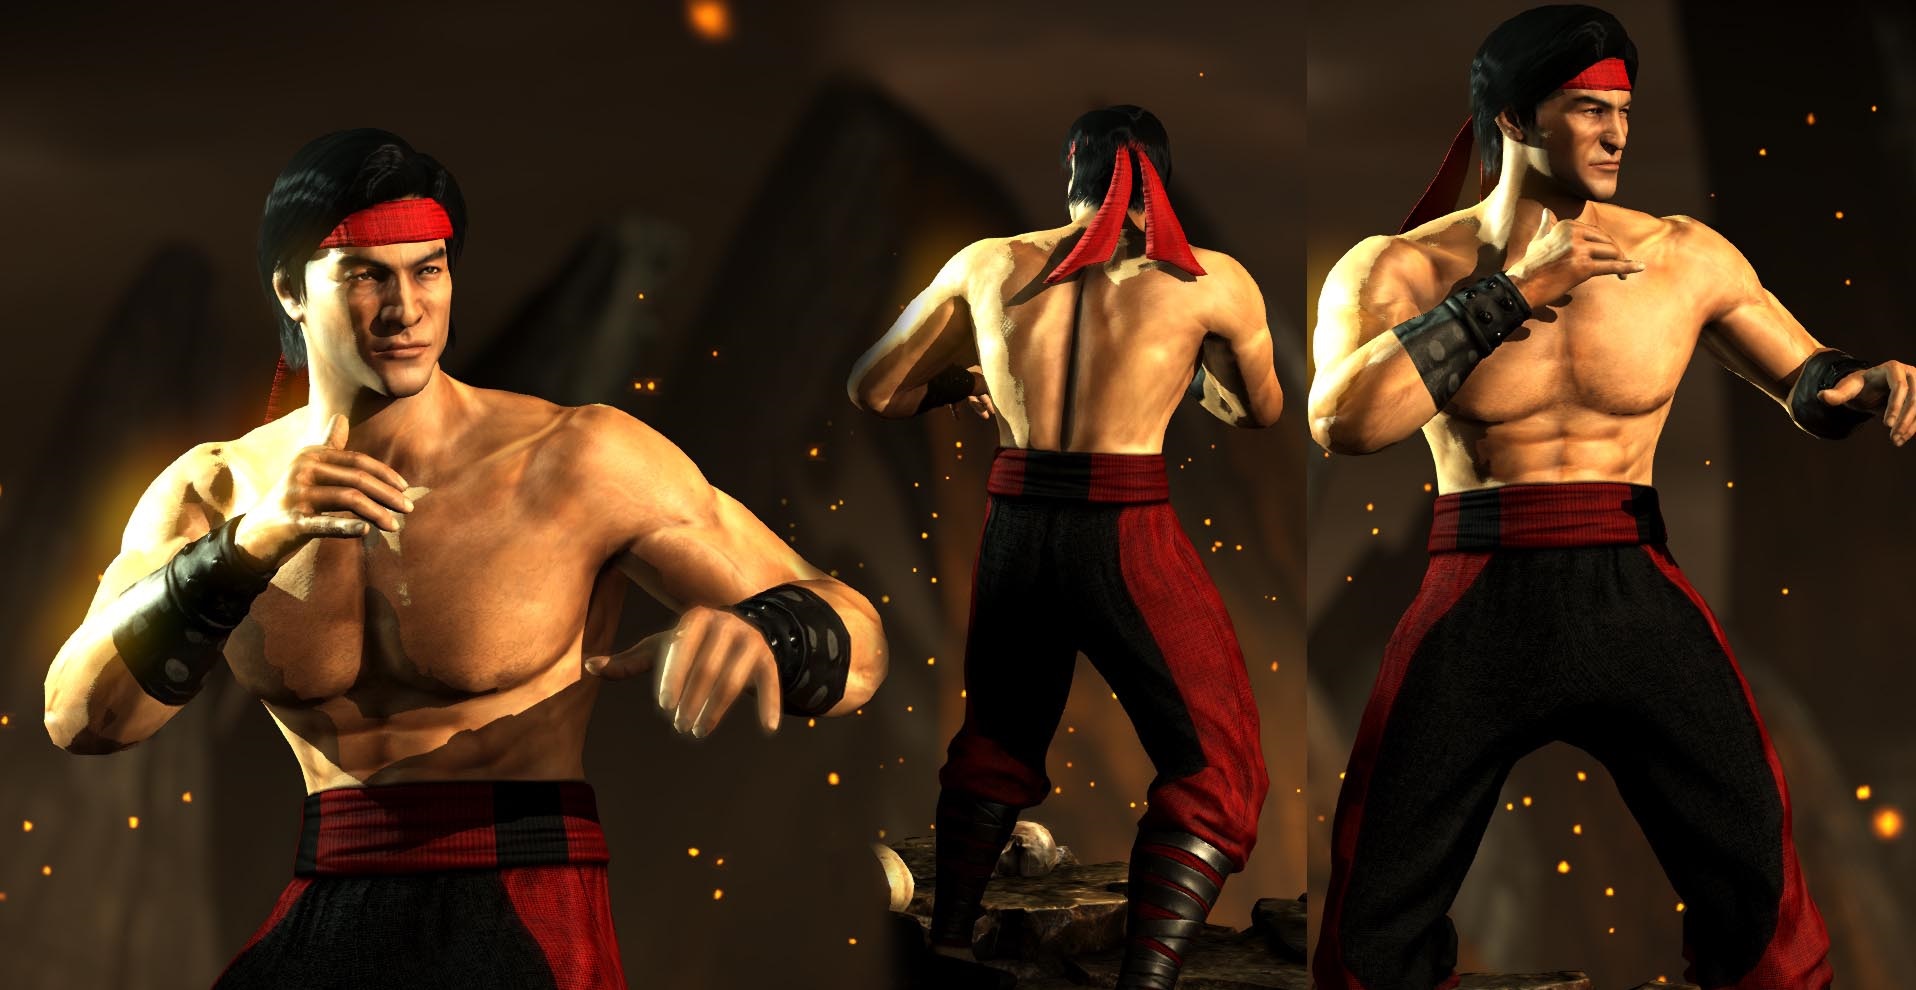 Image 3 - MKX - [ MK2 Skin Pack ] by King Kolossos mod for 